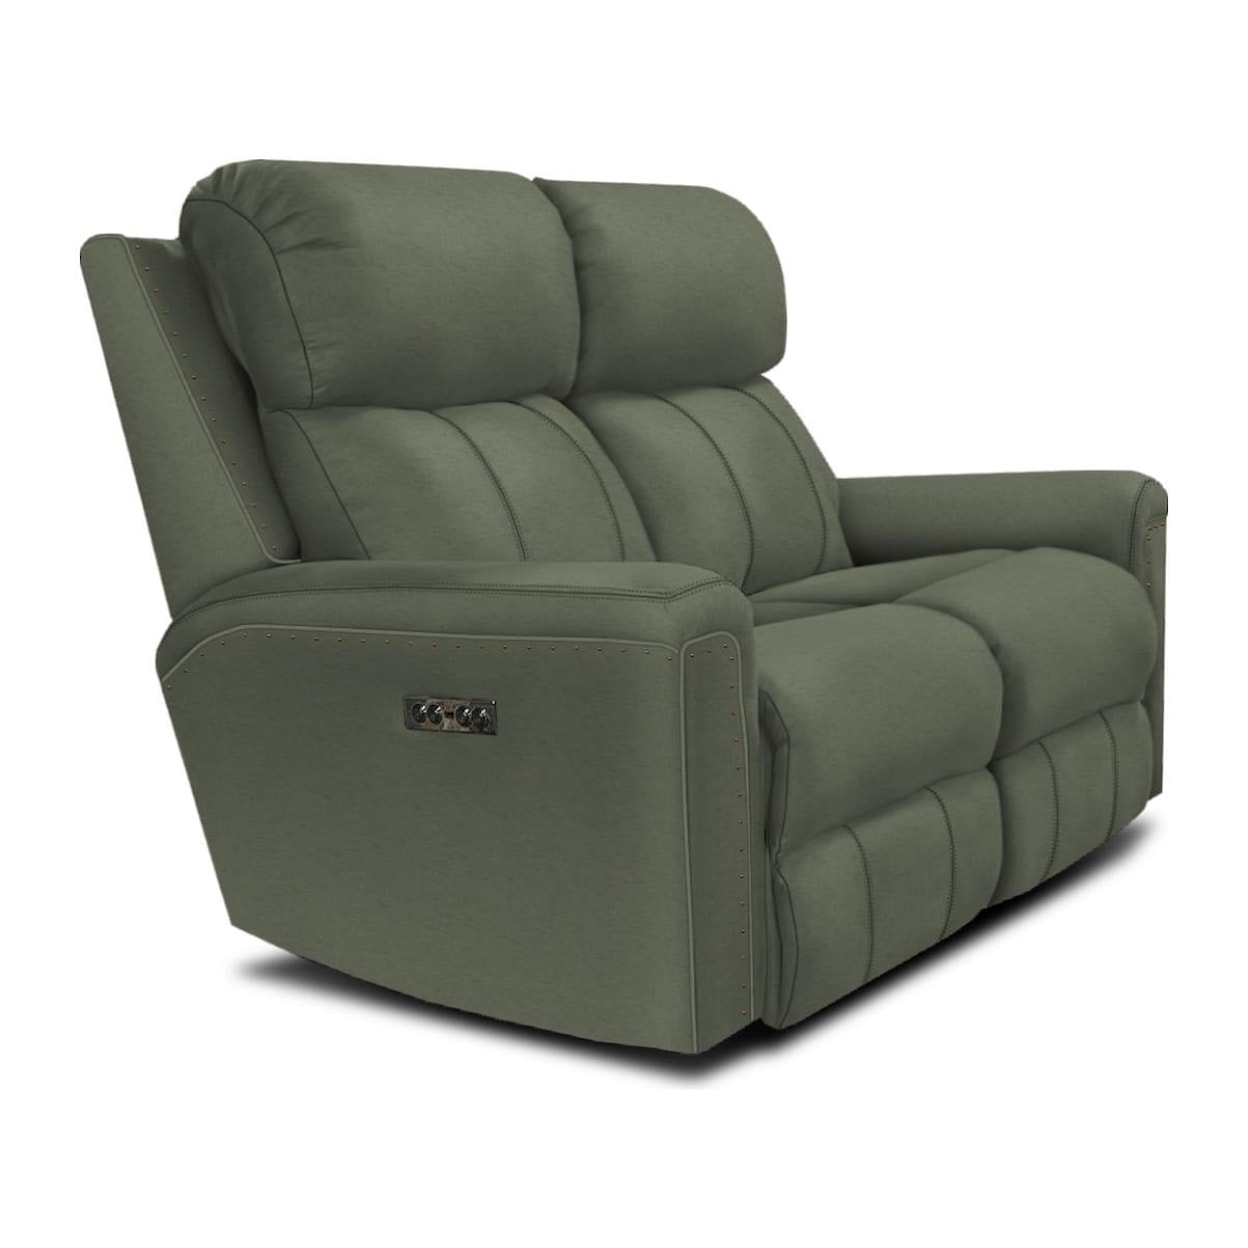 Dimensions EZ1C00/H/N Series EZ1C00H Double Reclining Loveseat with Nails